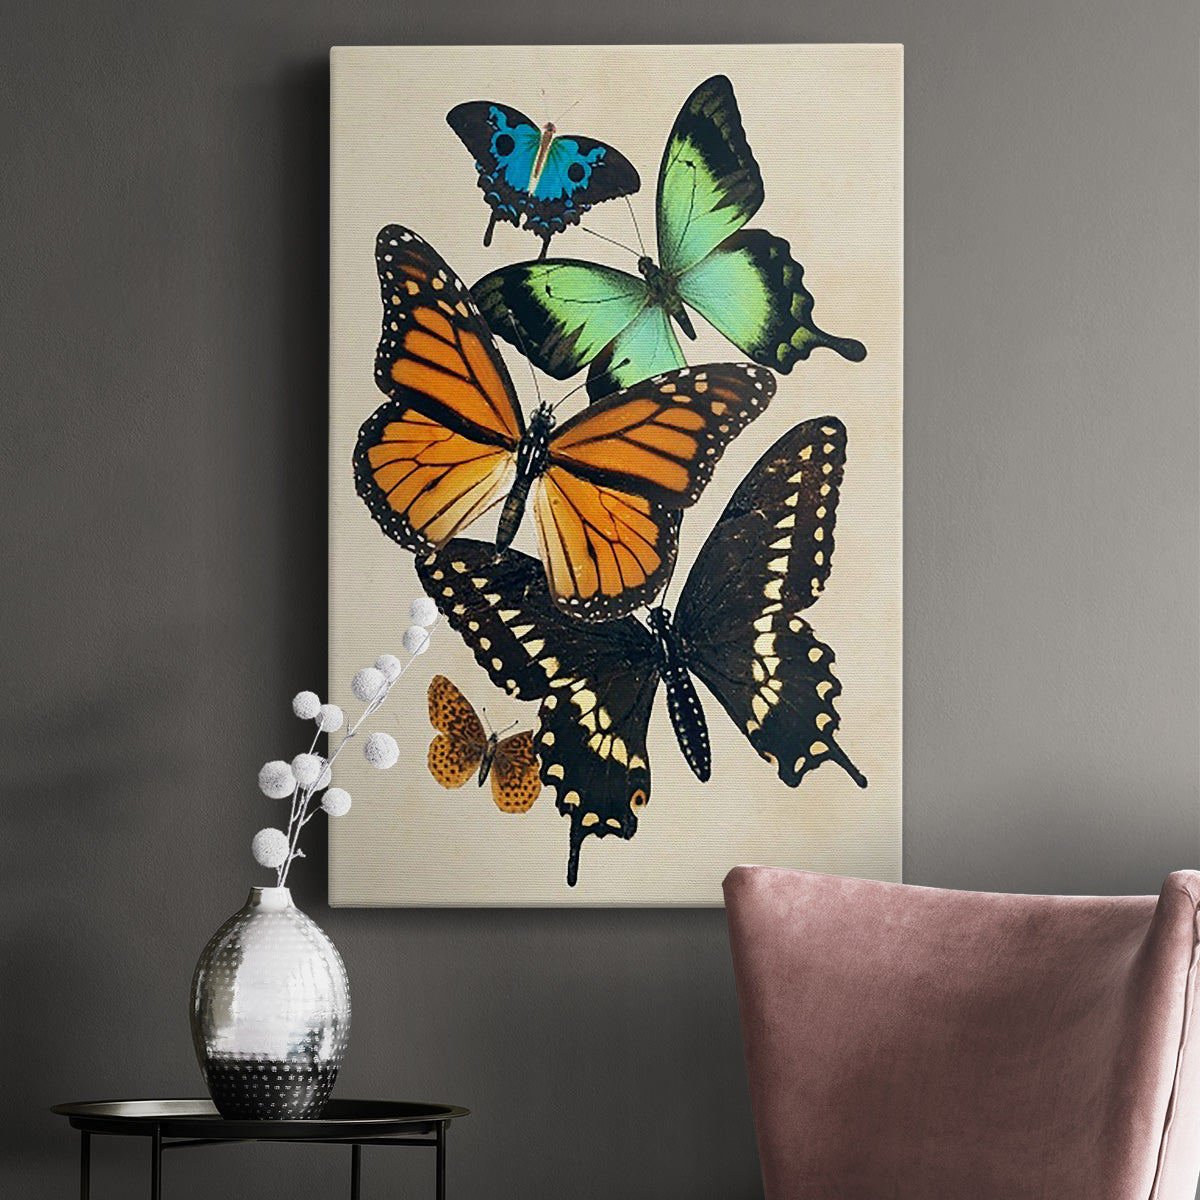 Collaged Butterflies I Premium Gallery Wrapped Canvas - Ready to Hang